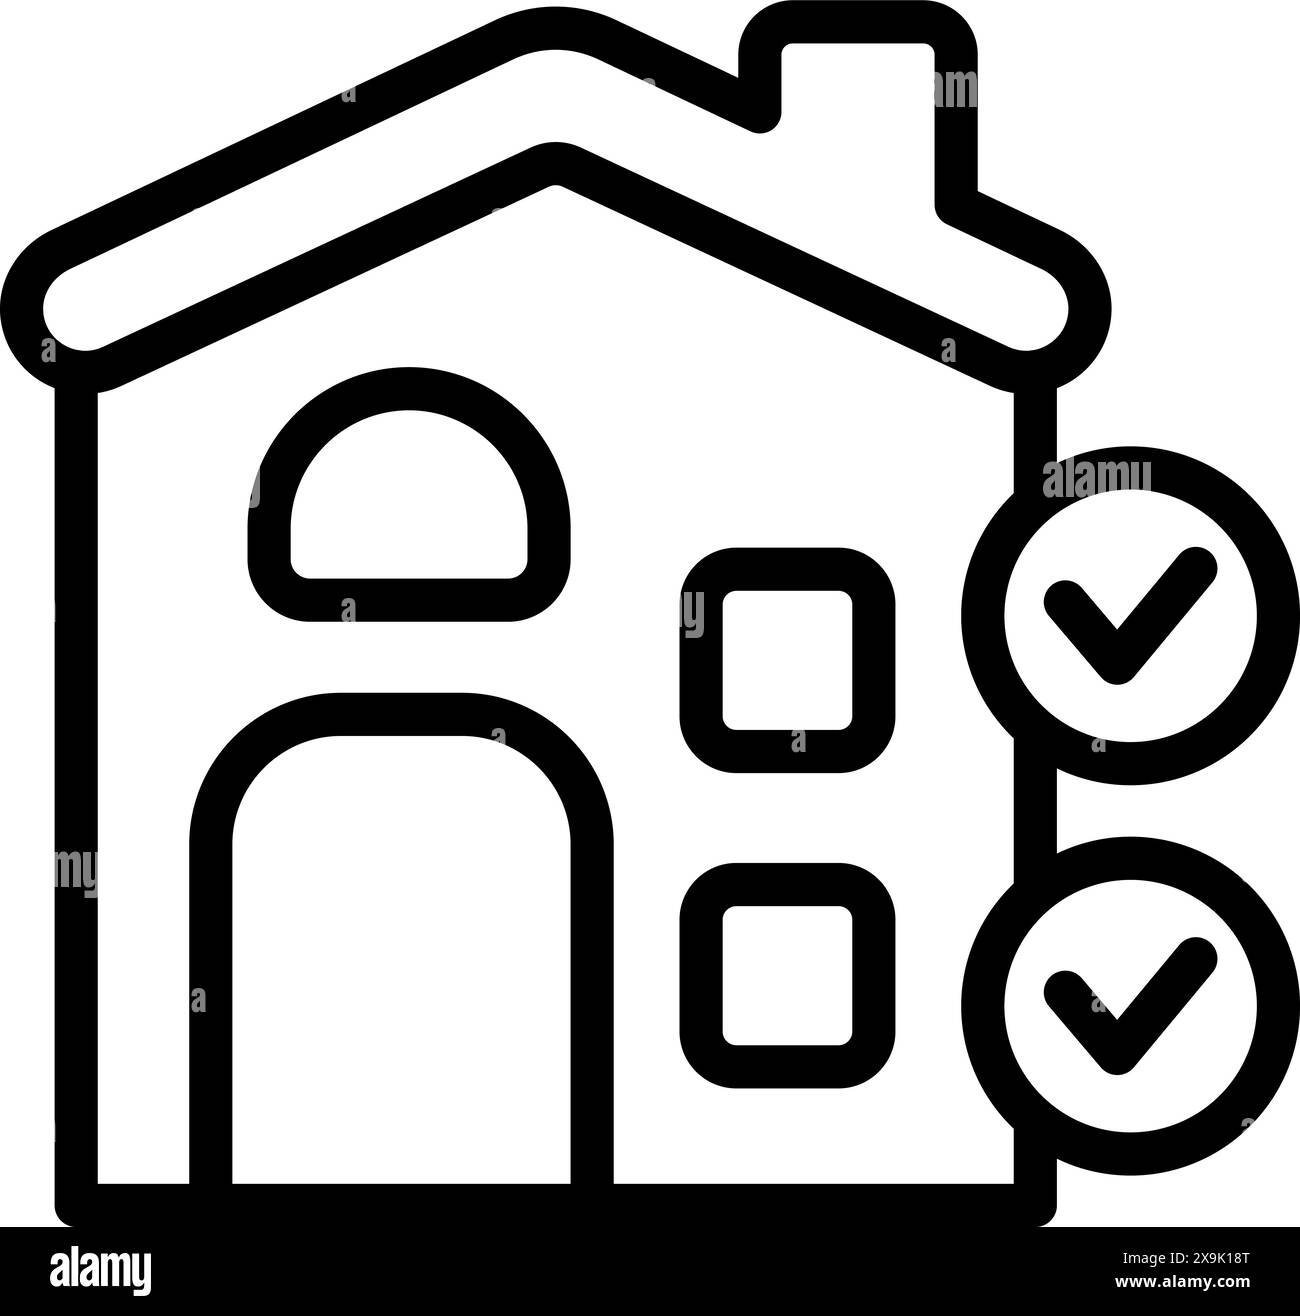 Linear house icon with checklist marks, symbolizing property evaluation or inspection Stock Vector